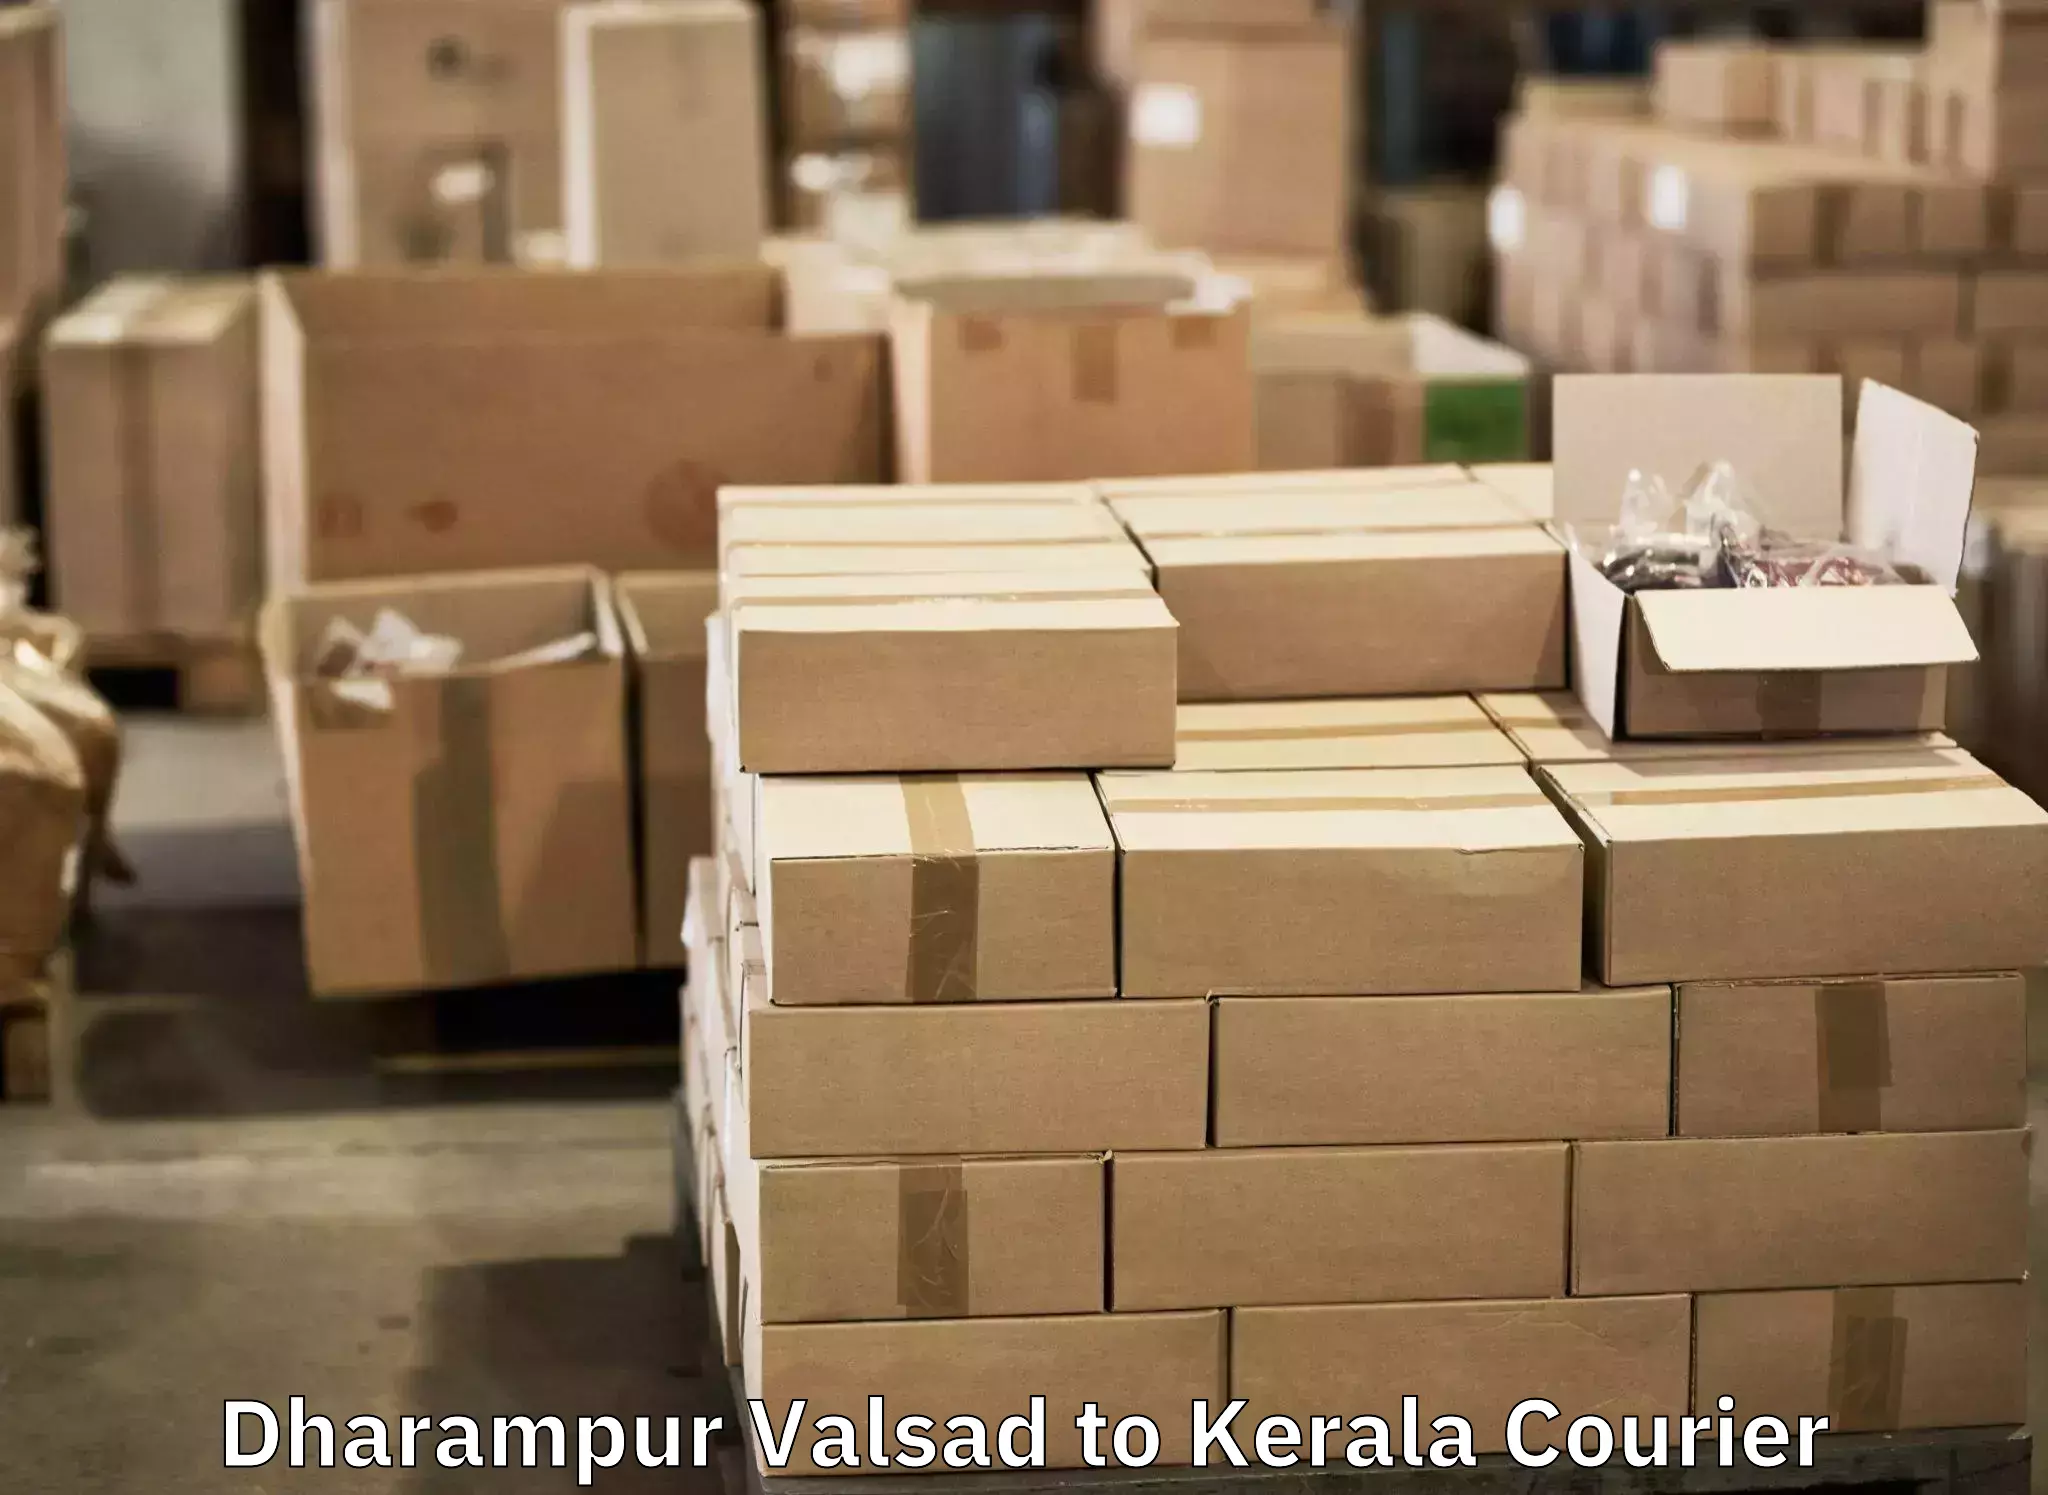 Baggage shipping experience Dharampur Valsad to Ponnani